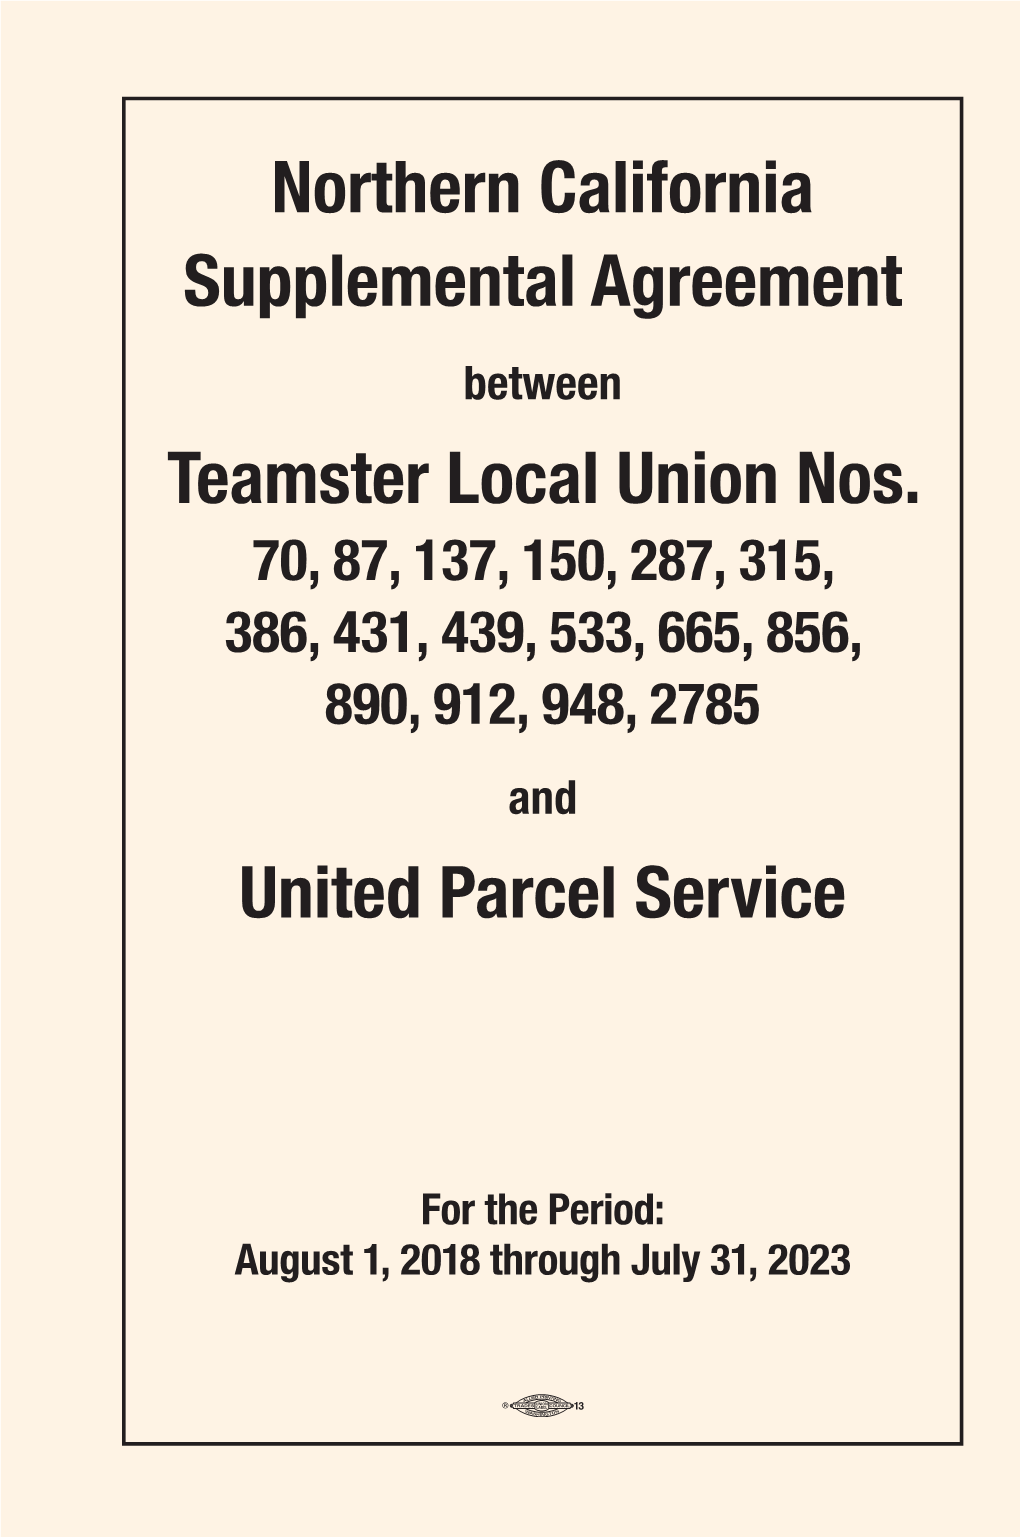 Northern California Supplemental Agreement Teamster Local Union